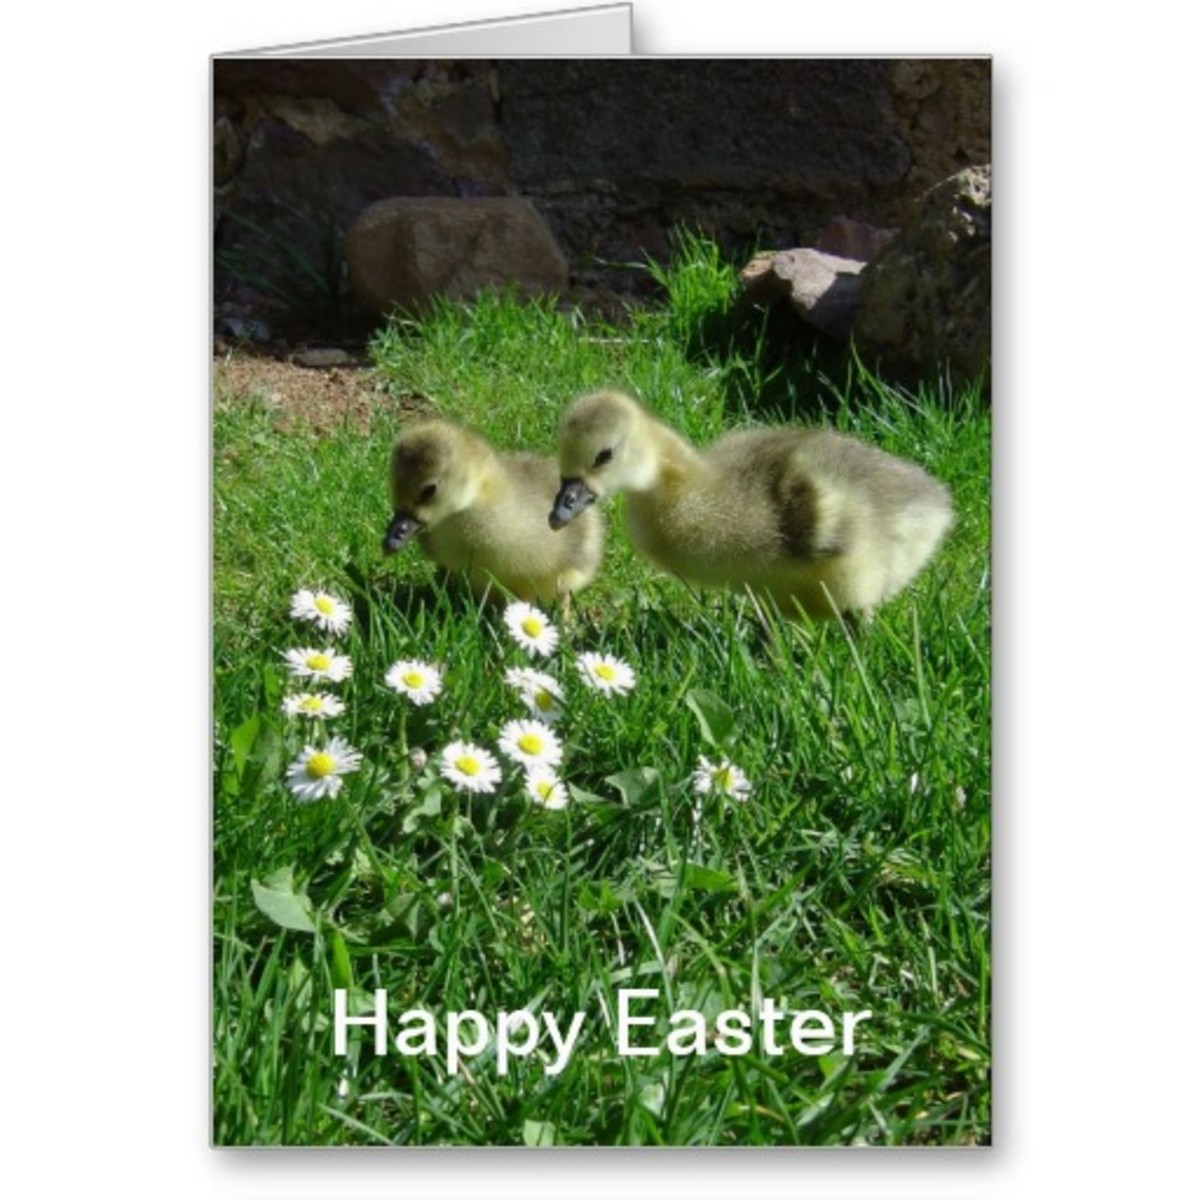 My Goslings Featured in My Easter and Greeting Cards